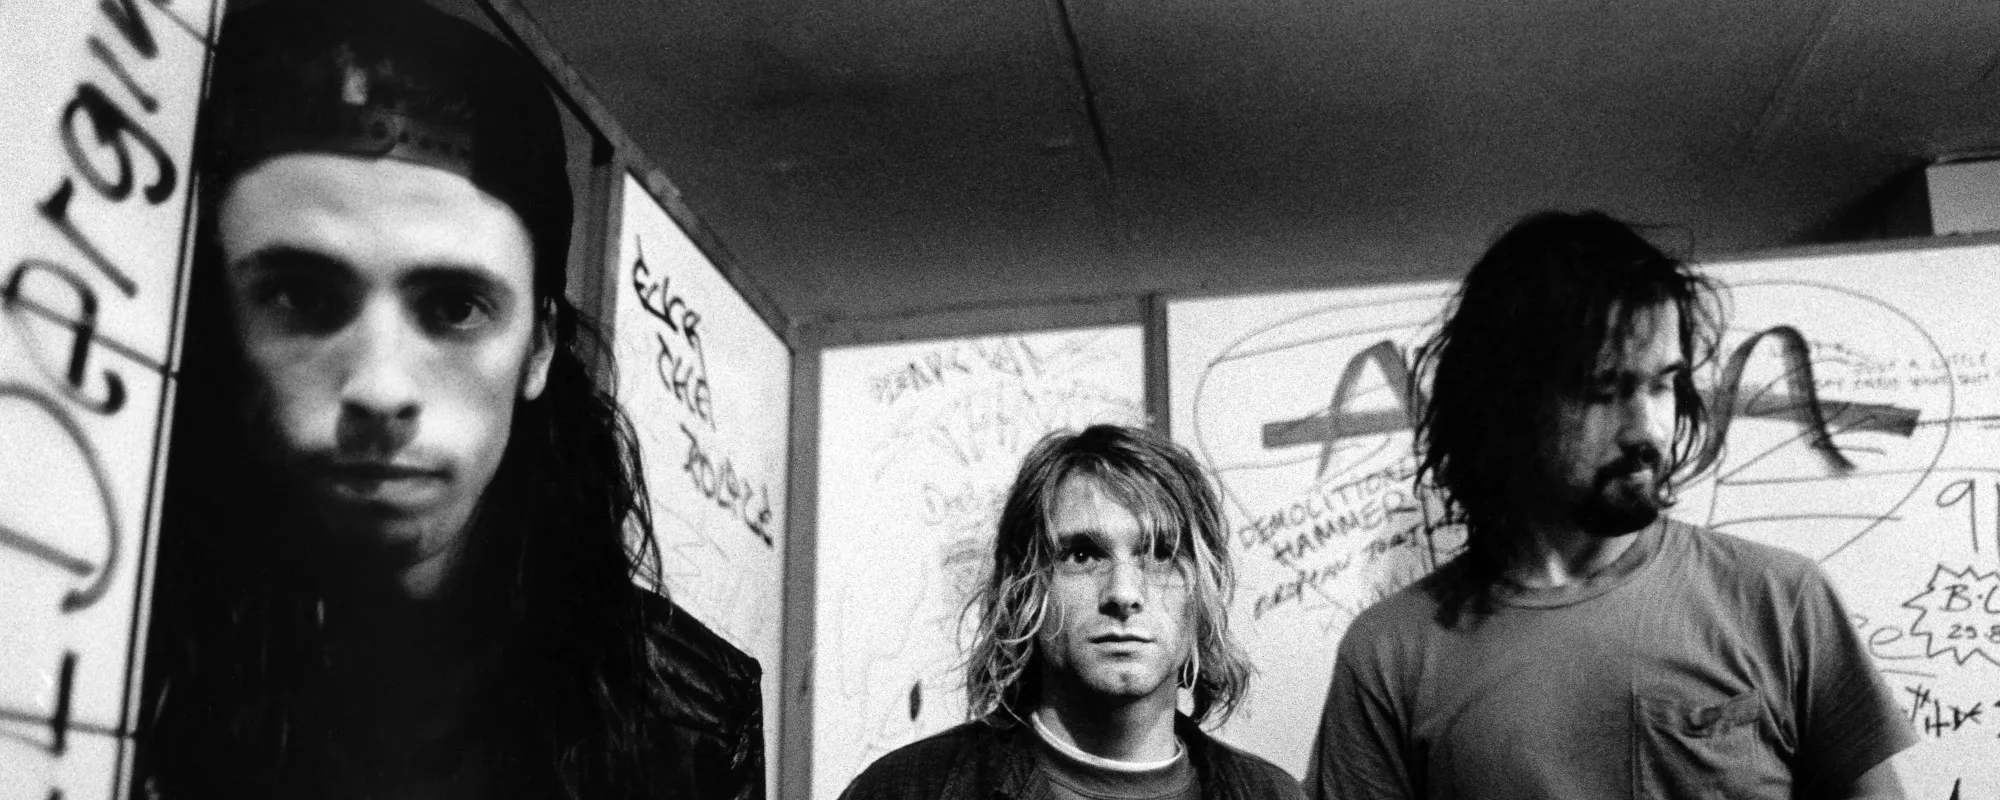 Behind the Meaning of “Heart-Shaped Box” by Nirvana